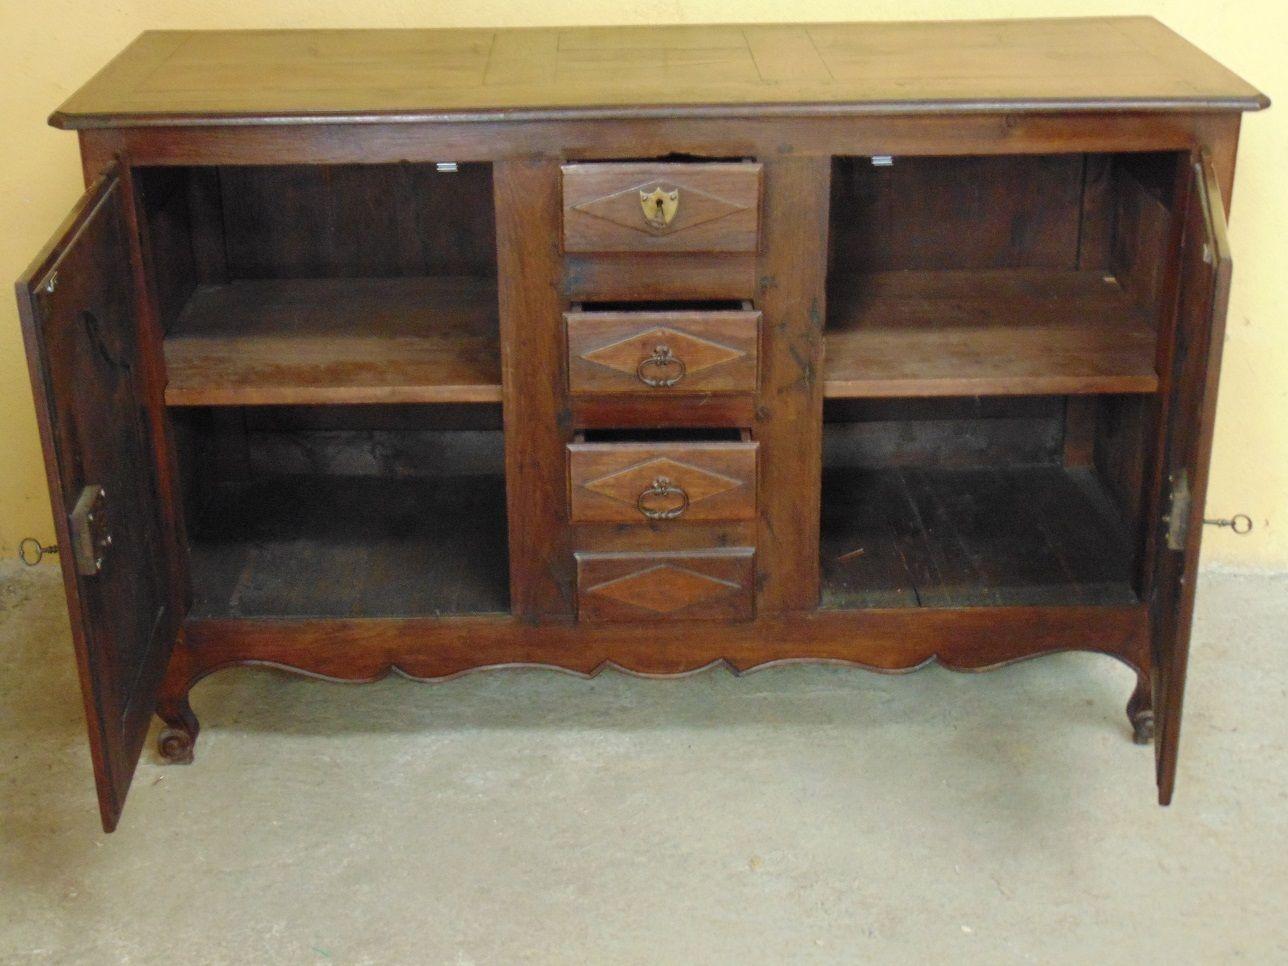 French Provincial 18th Century Provencal Sideboard in Oak, circa 1790